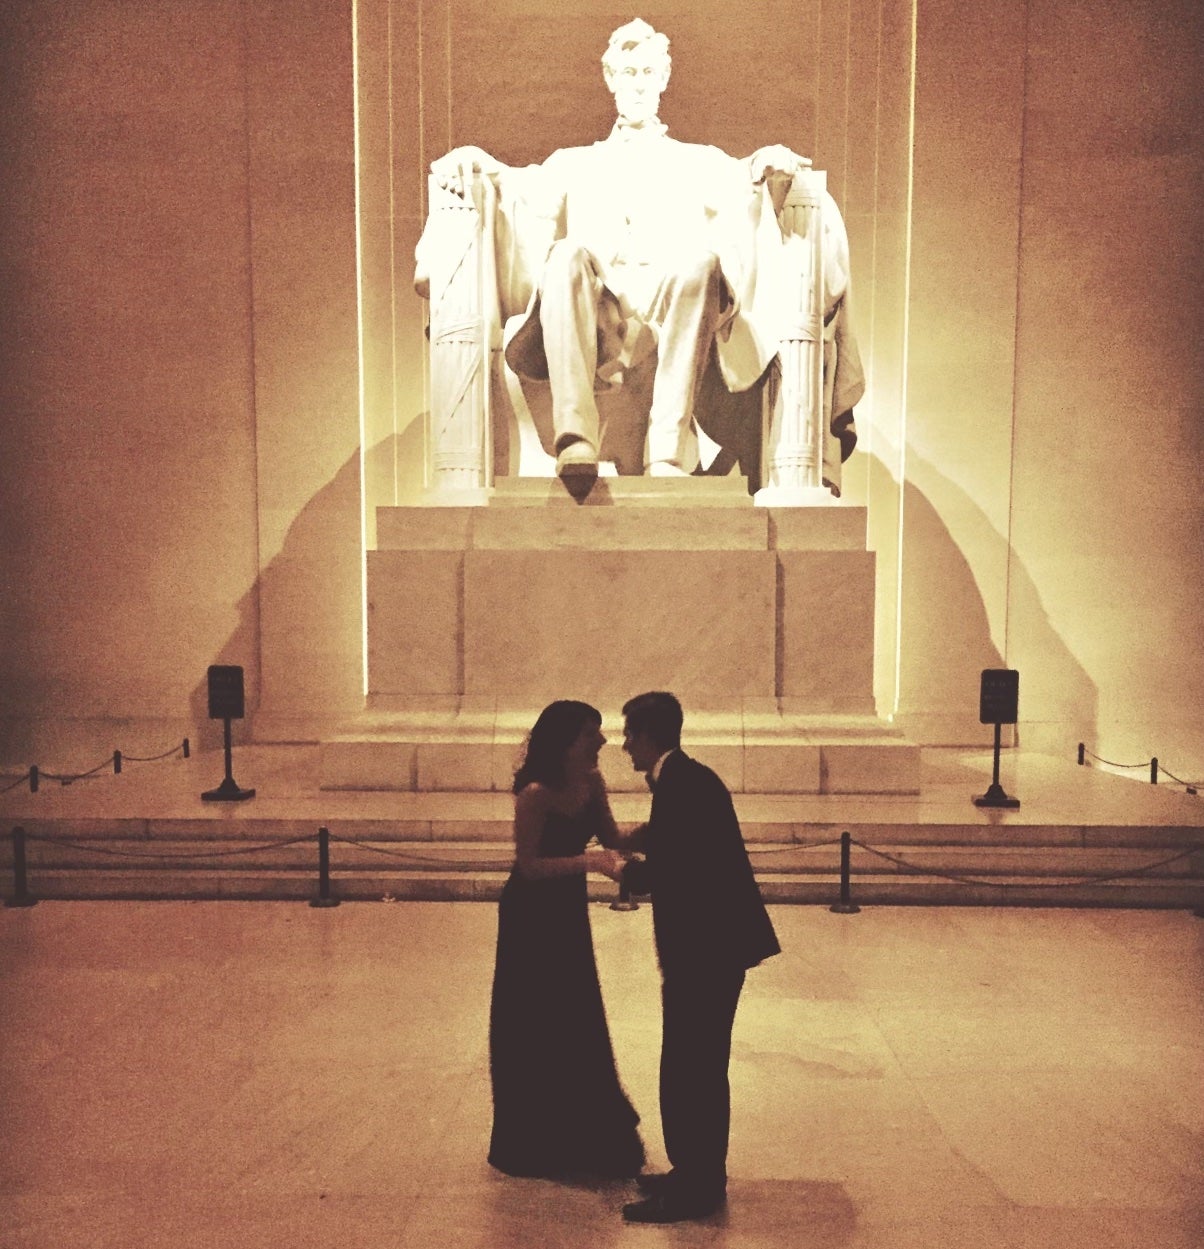 Two people in formal clothes in front of the Lincoln Memorial